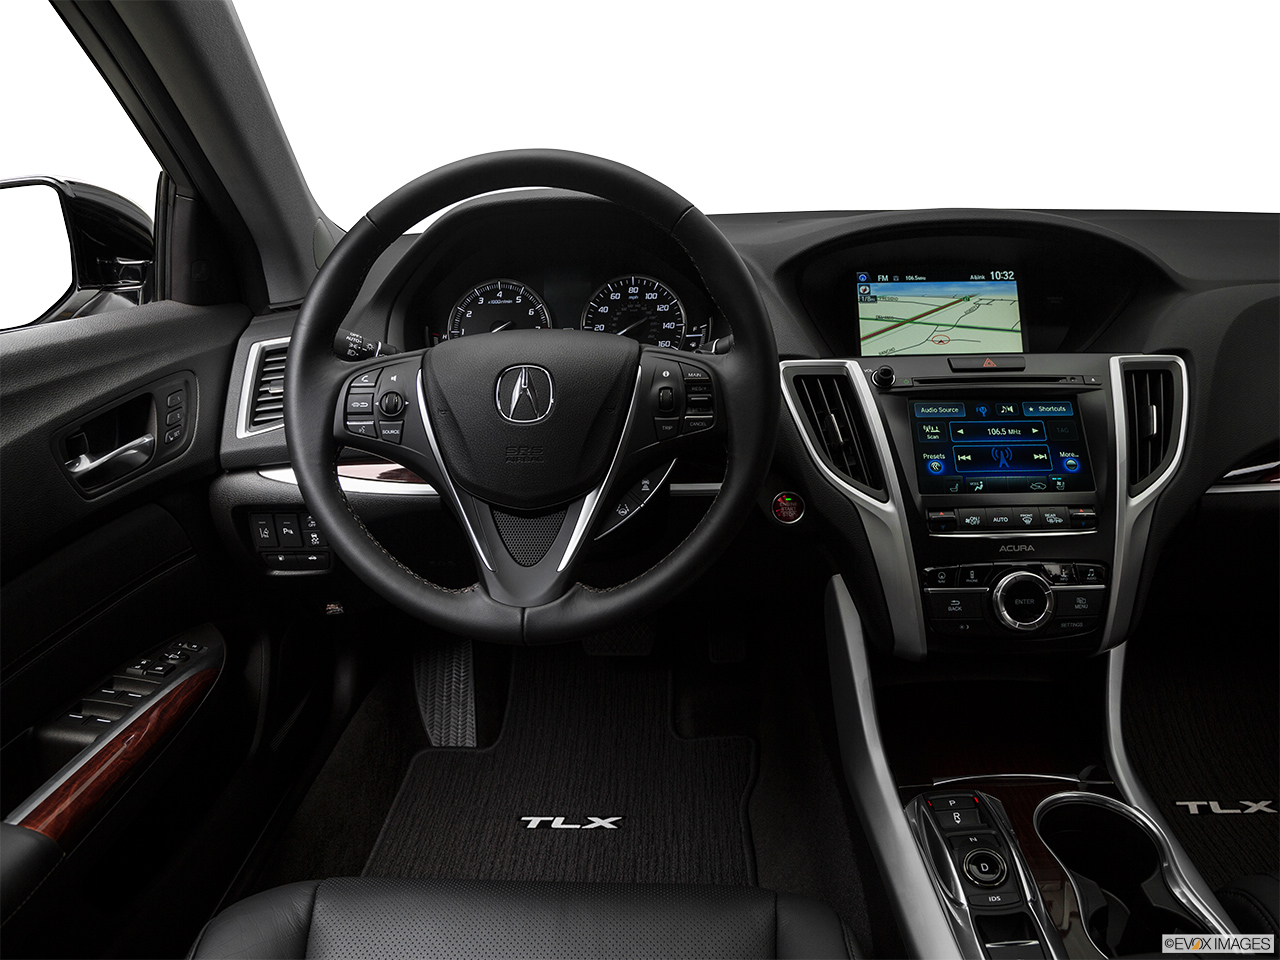 2017 Acura TLX 3.5L Steering wheel/Center Console. 